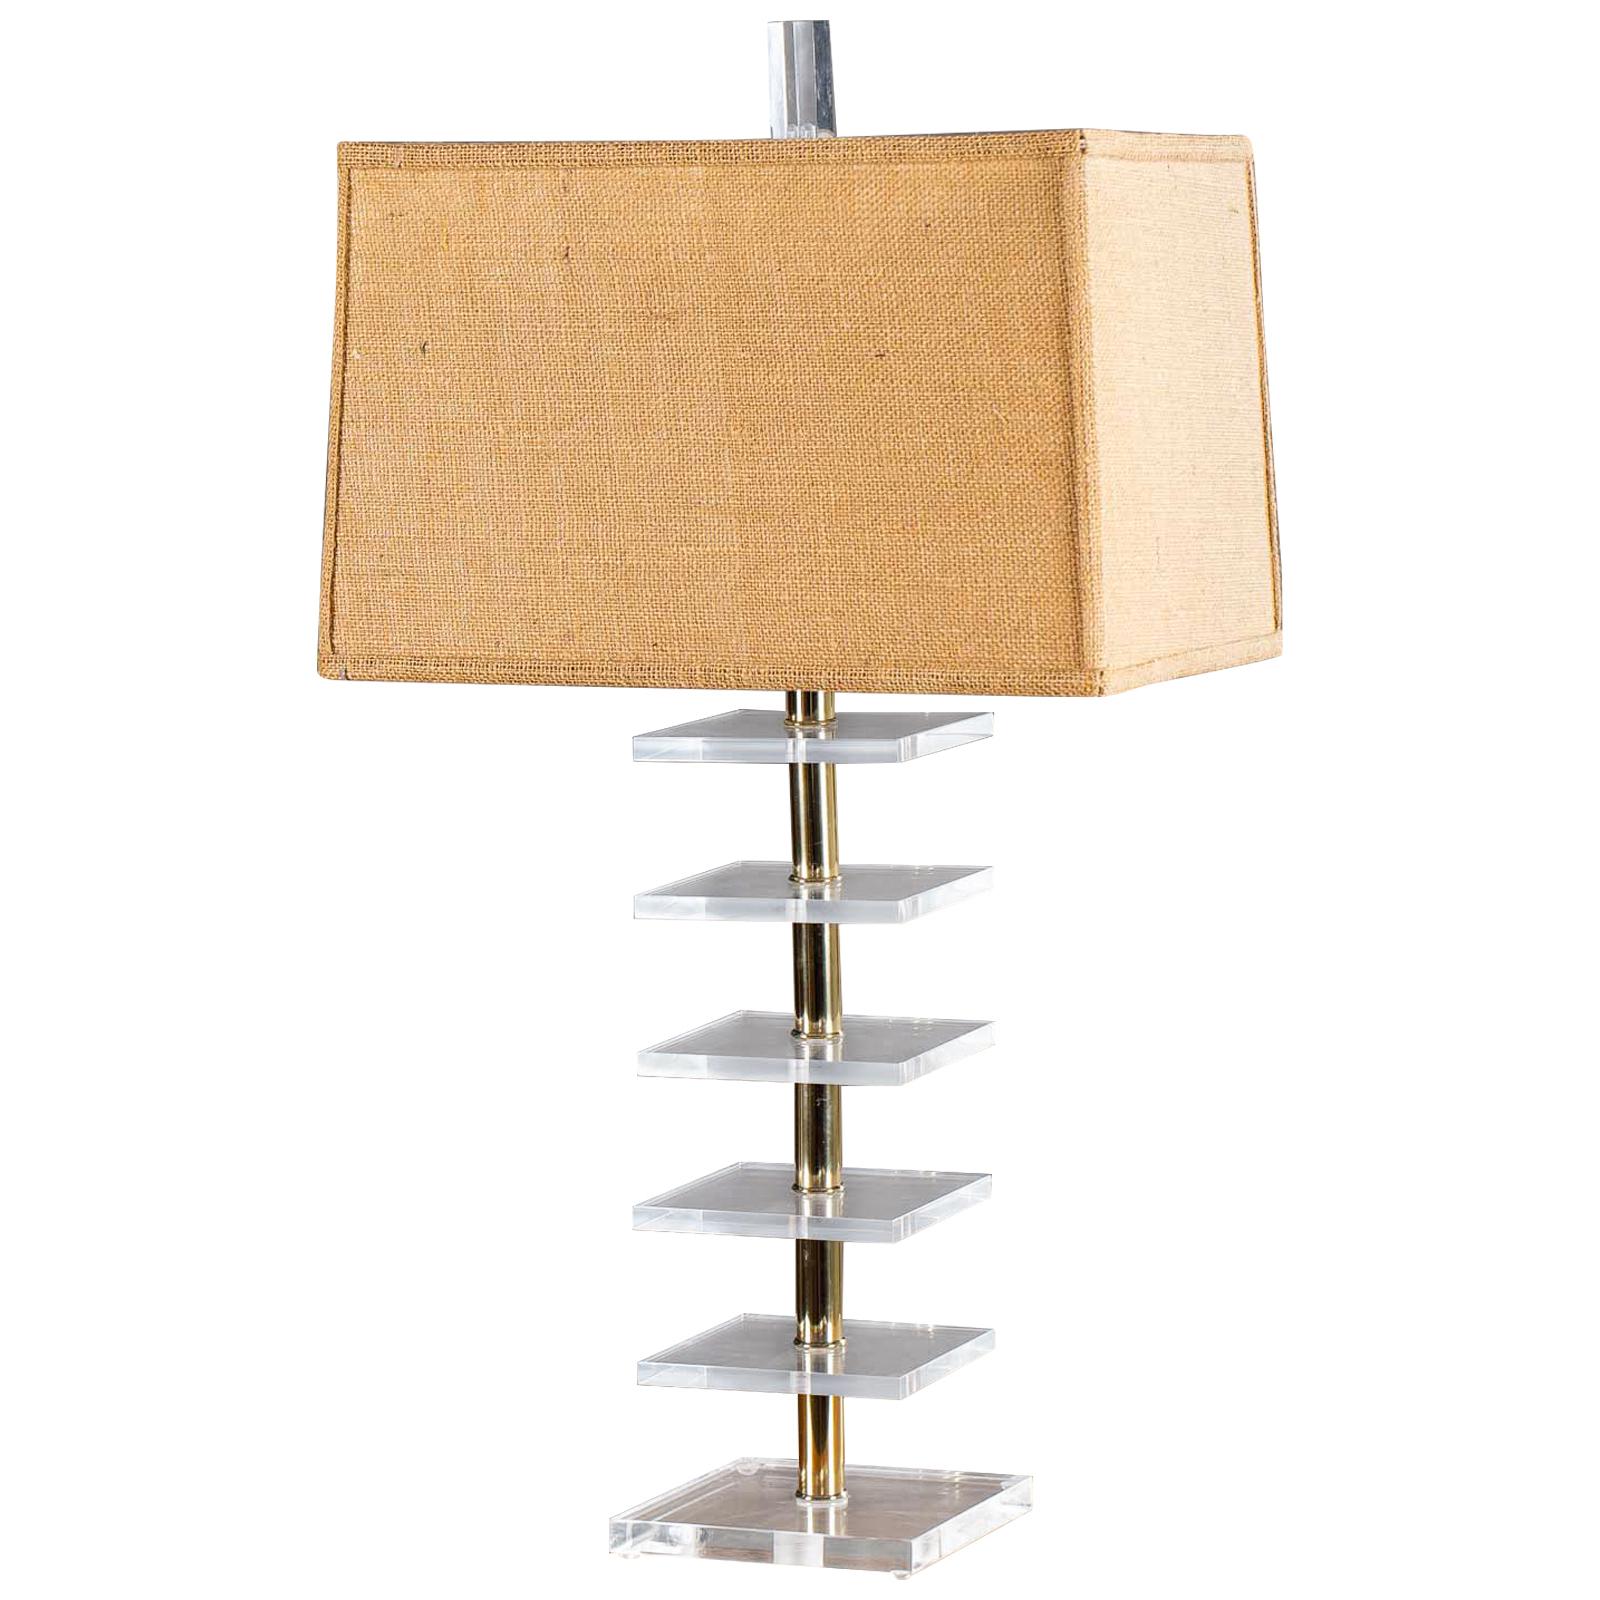 Mid-Century Modern Lucite and Brass Lamp, France, circa 1965 For Sale